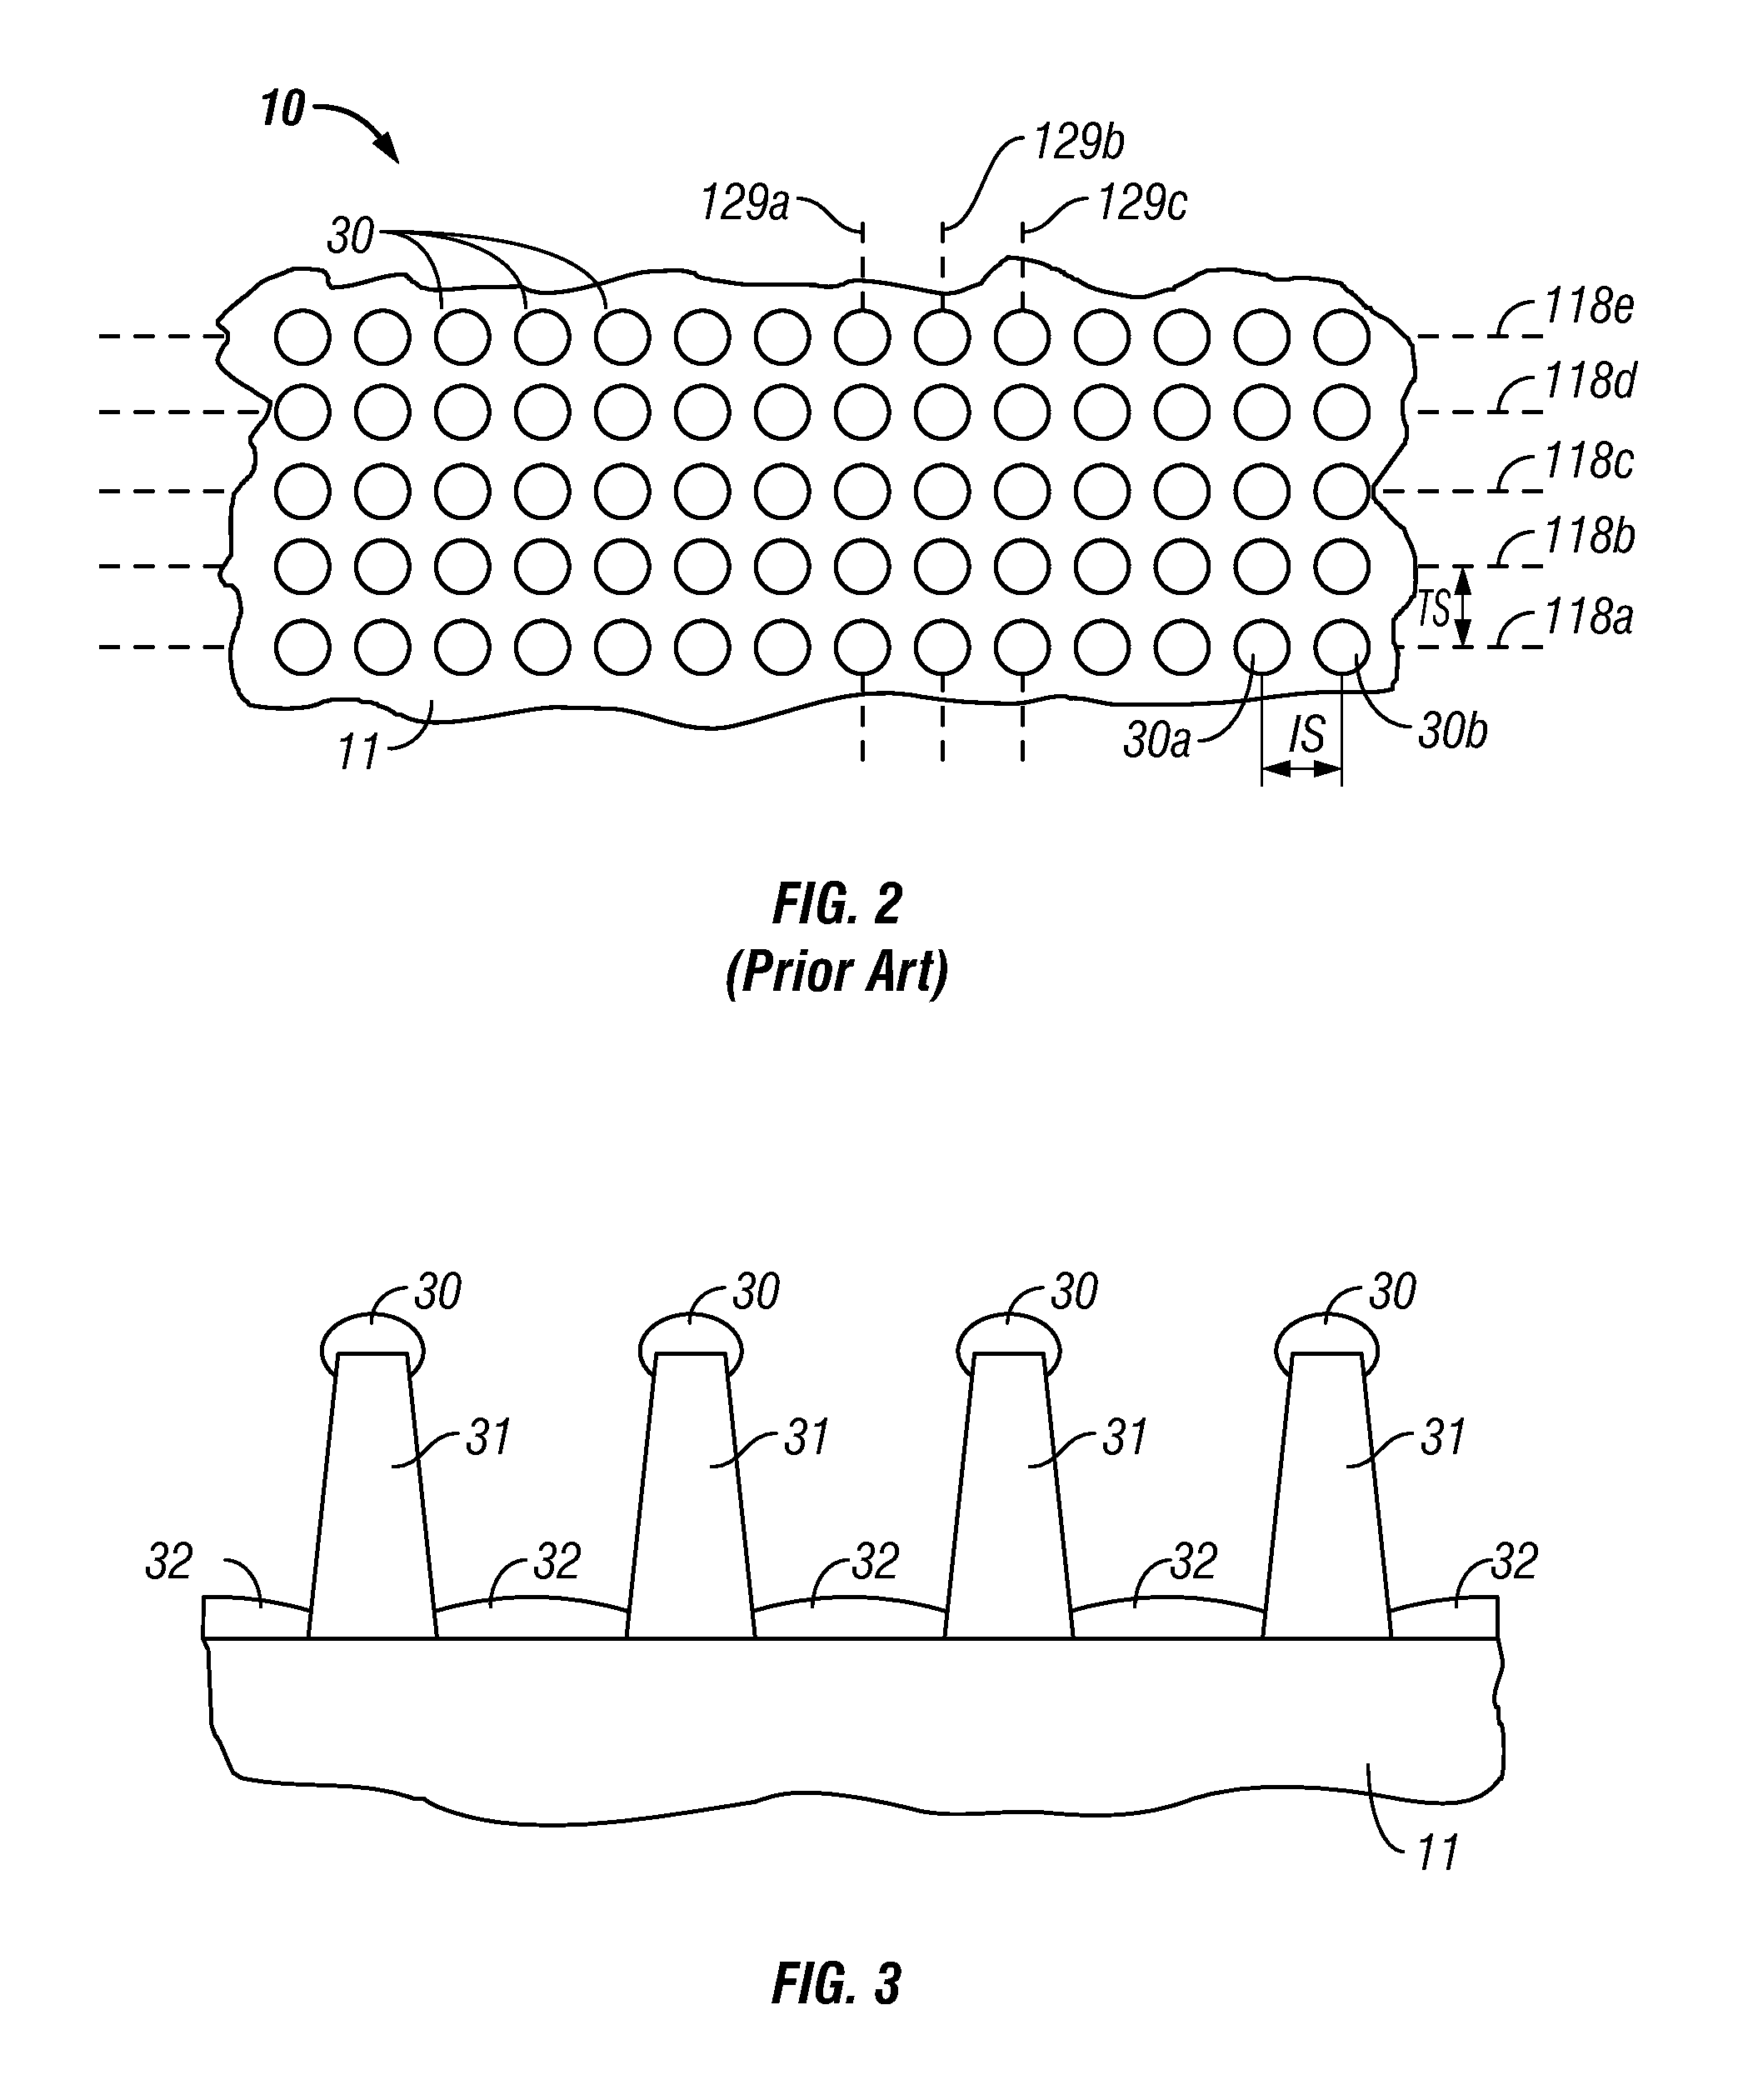 Method using block copolymers for making a master mold with high bit-aspect-ratio for nanoimprinting patterned magnetic recording disks